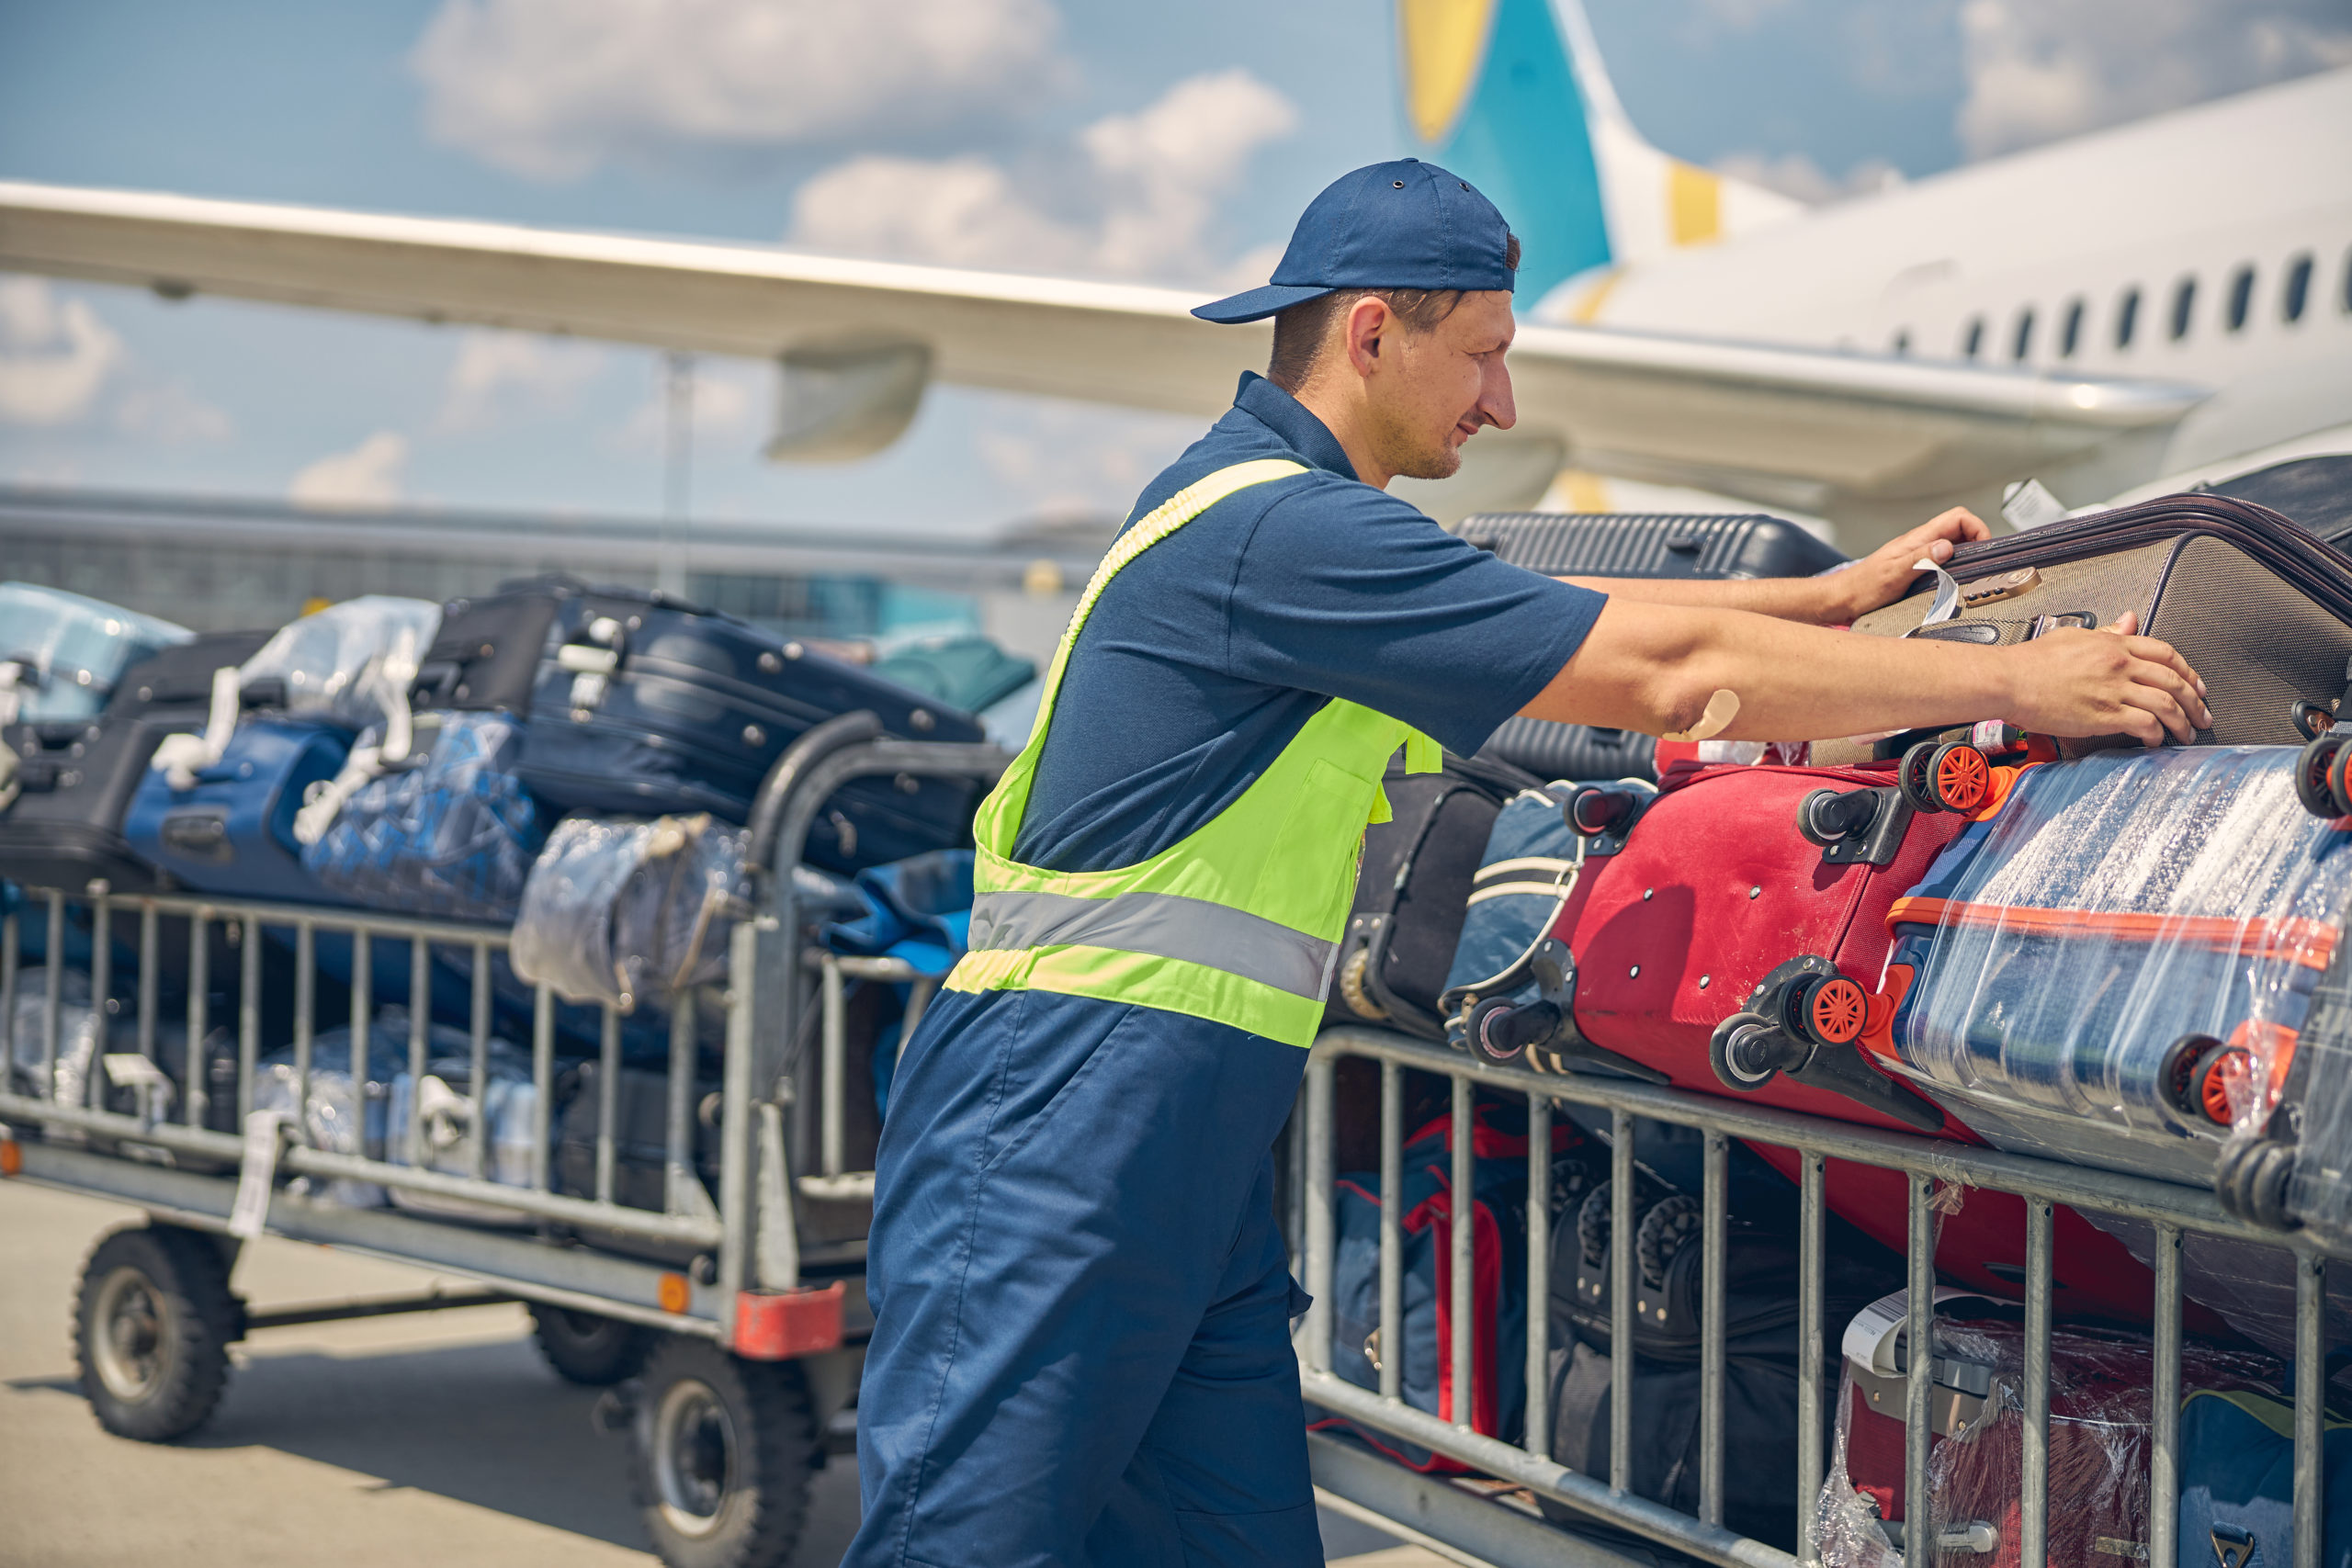 Male airline baggage handler in blue overalls and cap with safety vest, handling luggage